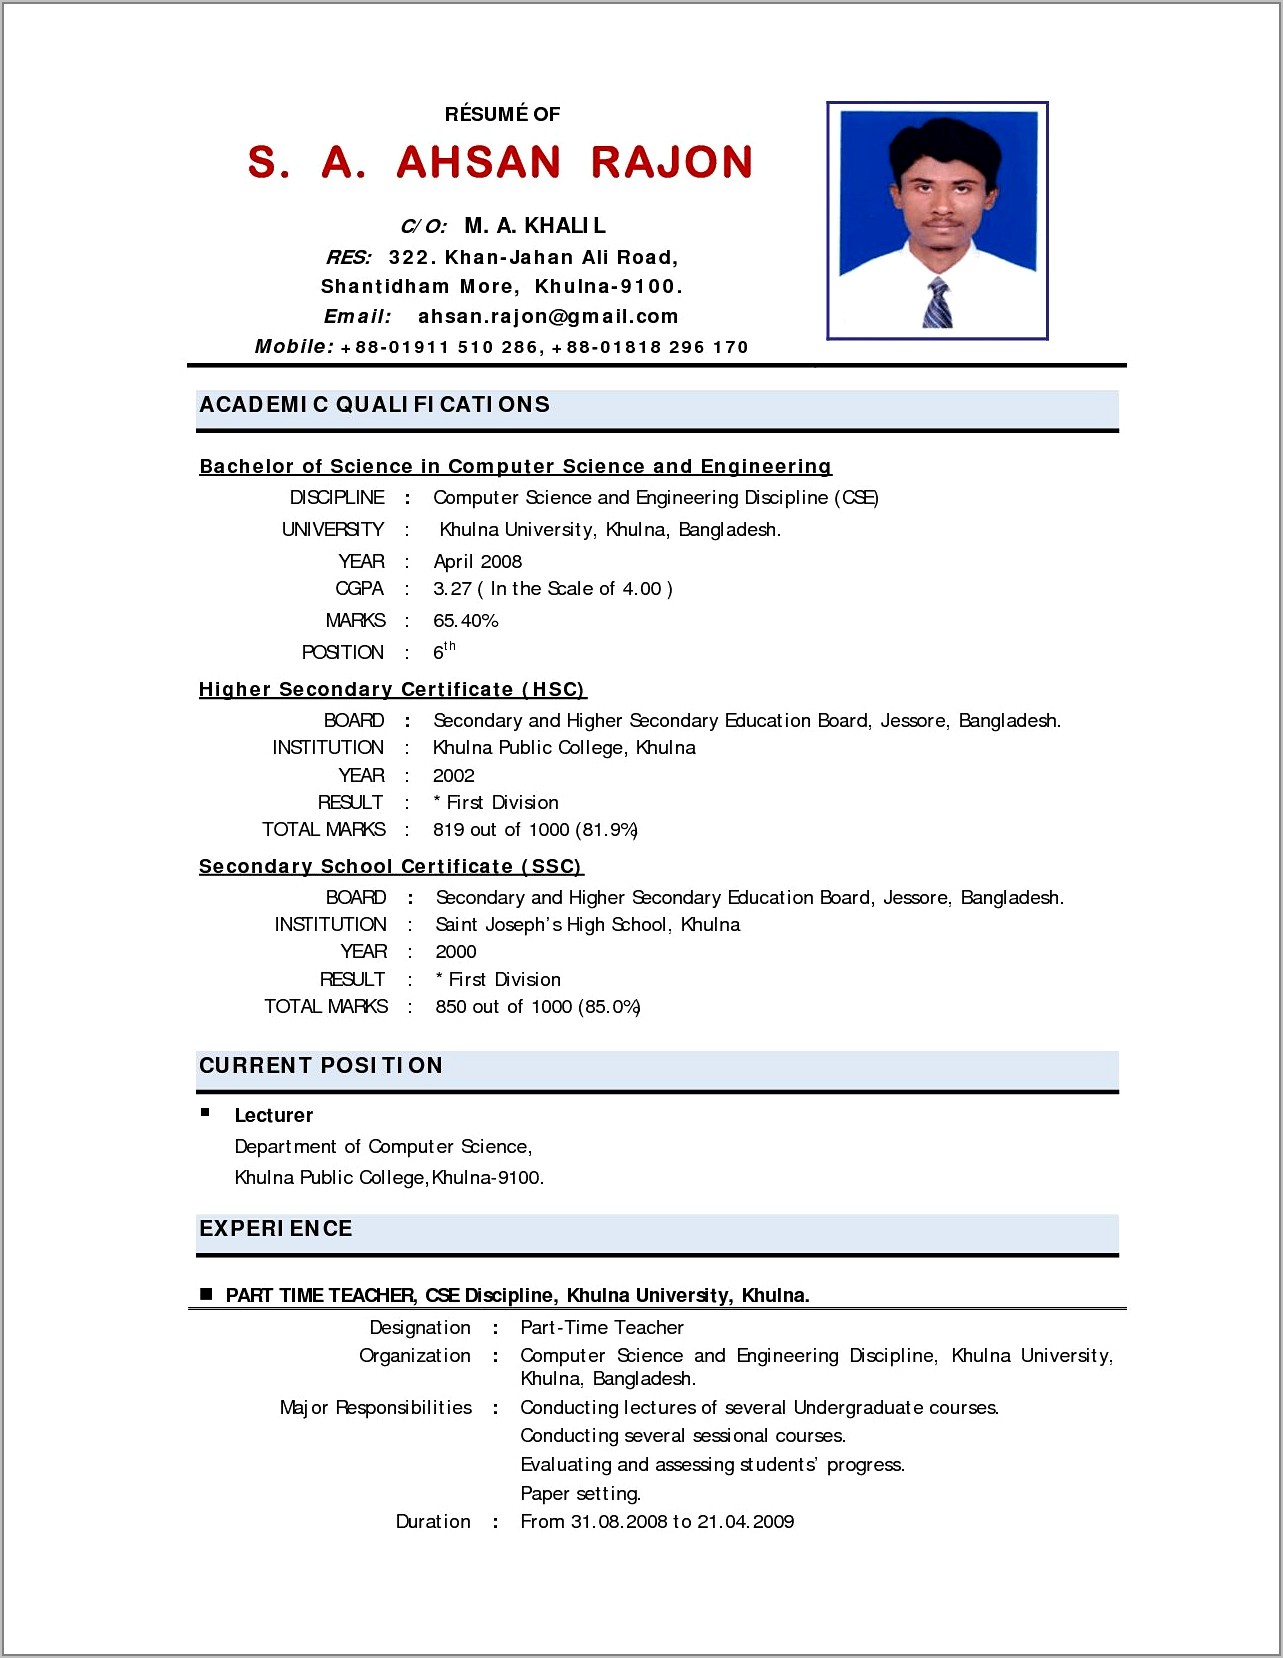 Resume Format For Lecturer Freshers Pdf